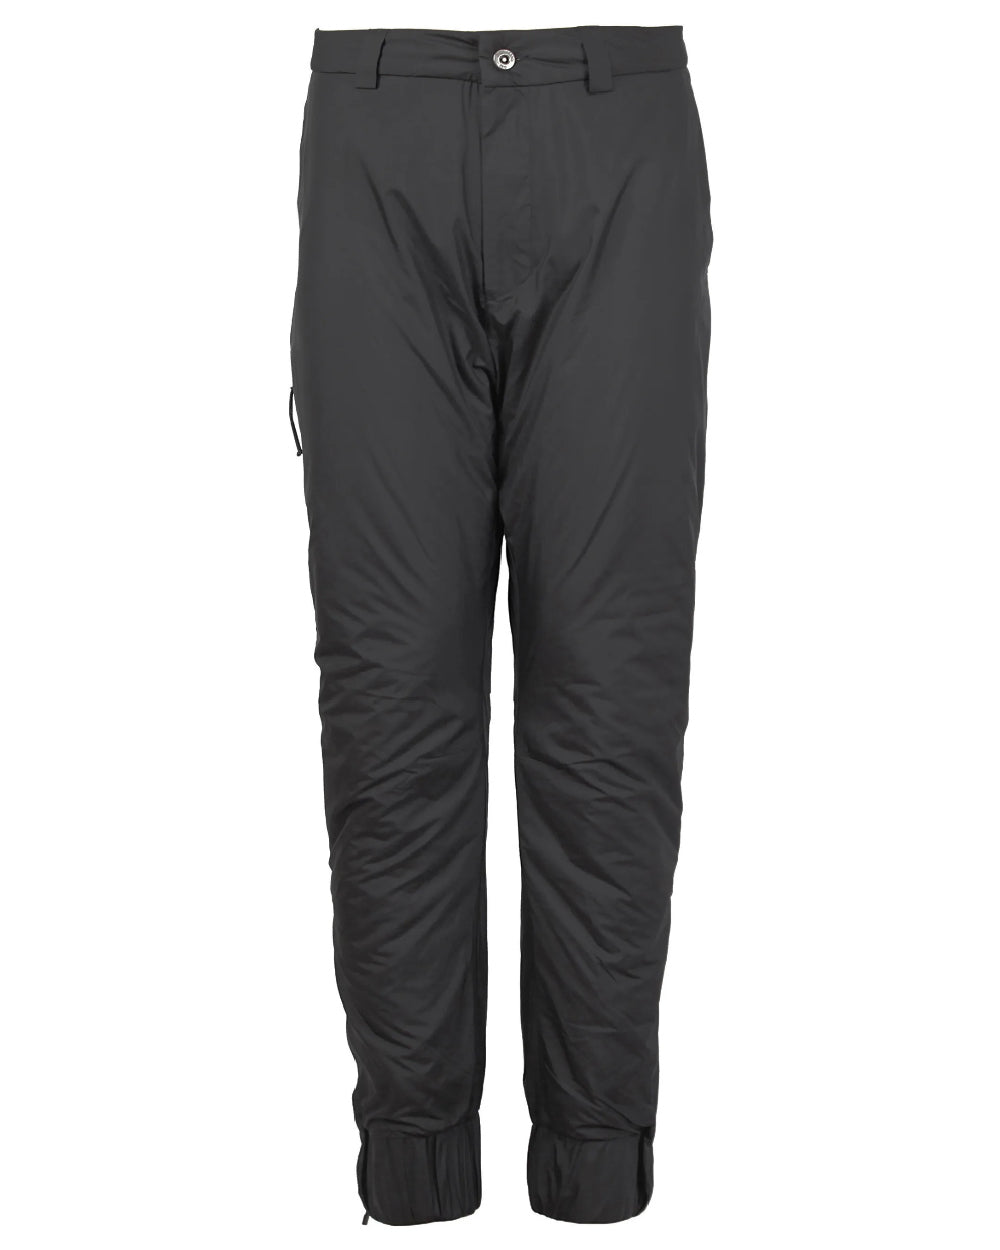 Black Coloured Didriksons Joel Pants On A White Background 